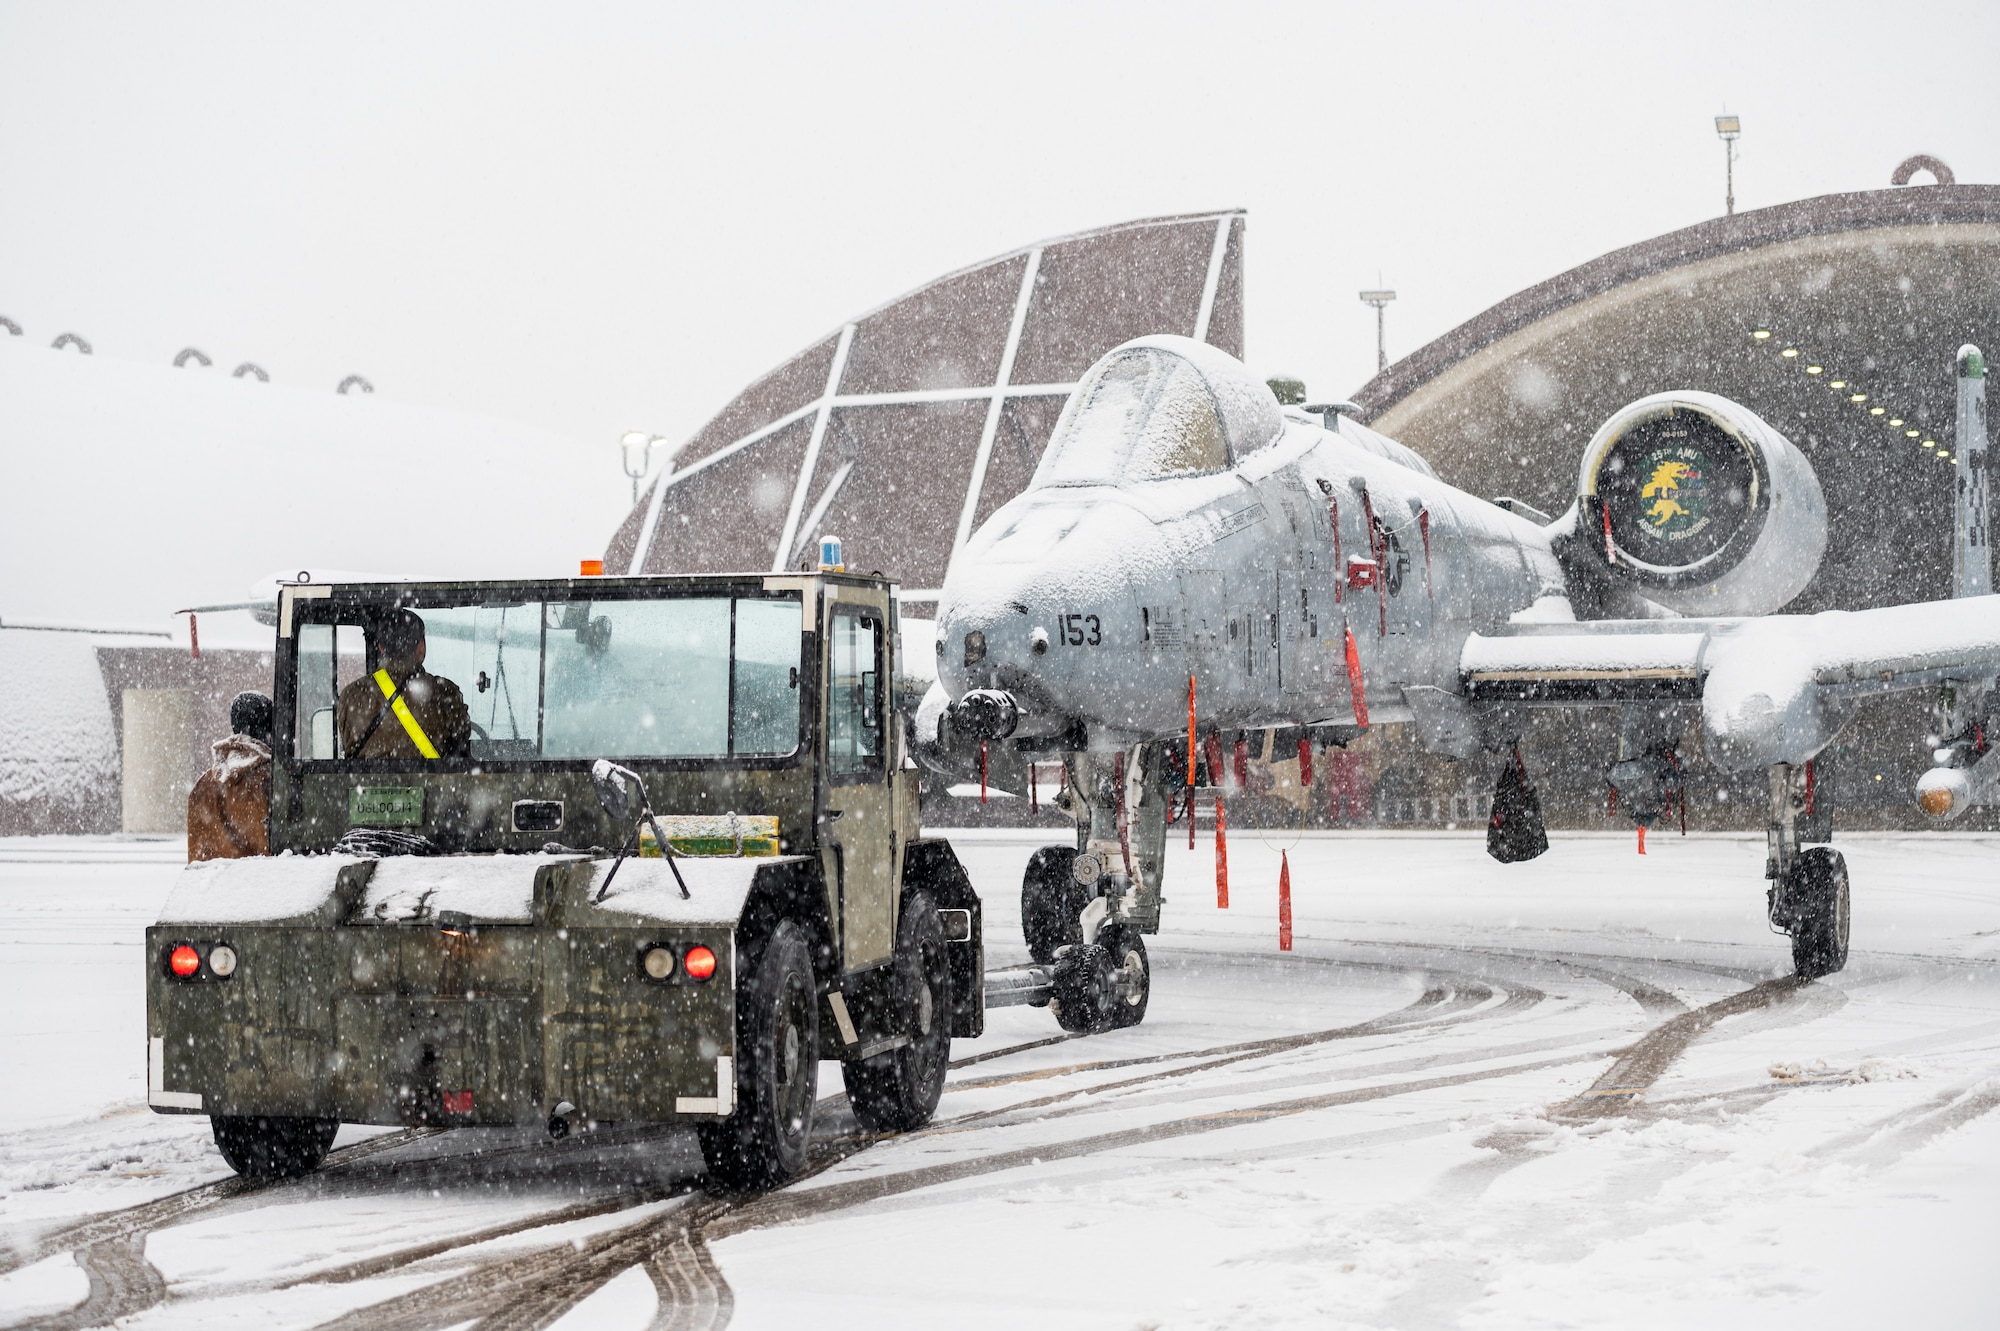 25th Fighter Generation Squadron crew chiefs relocate an A-10C Thunderbolt II from the flightline into a hangar using an aircraft tow vehicle during an FGS training event